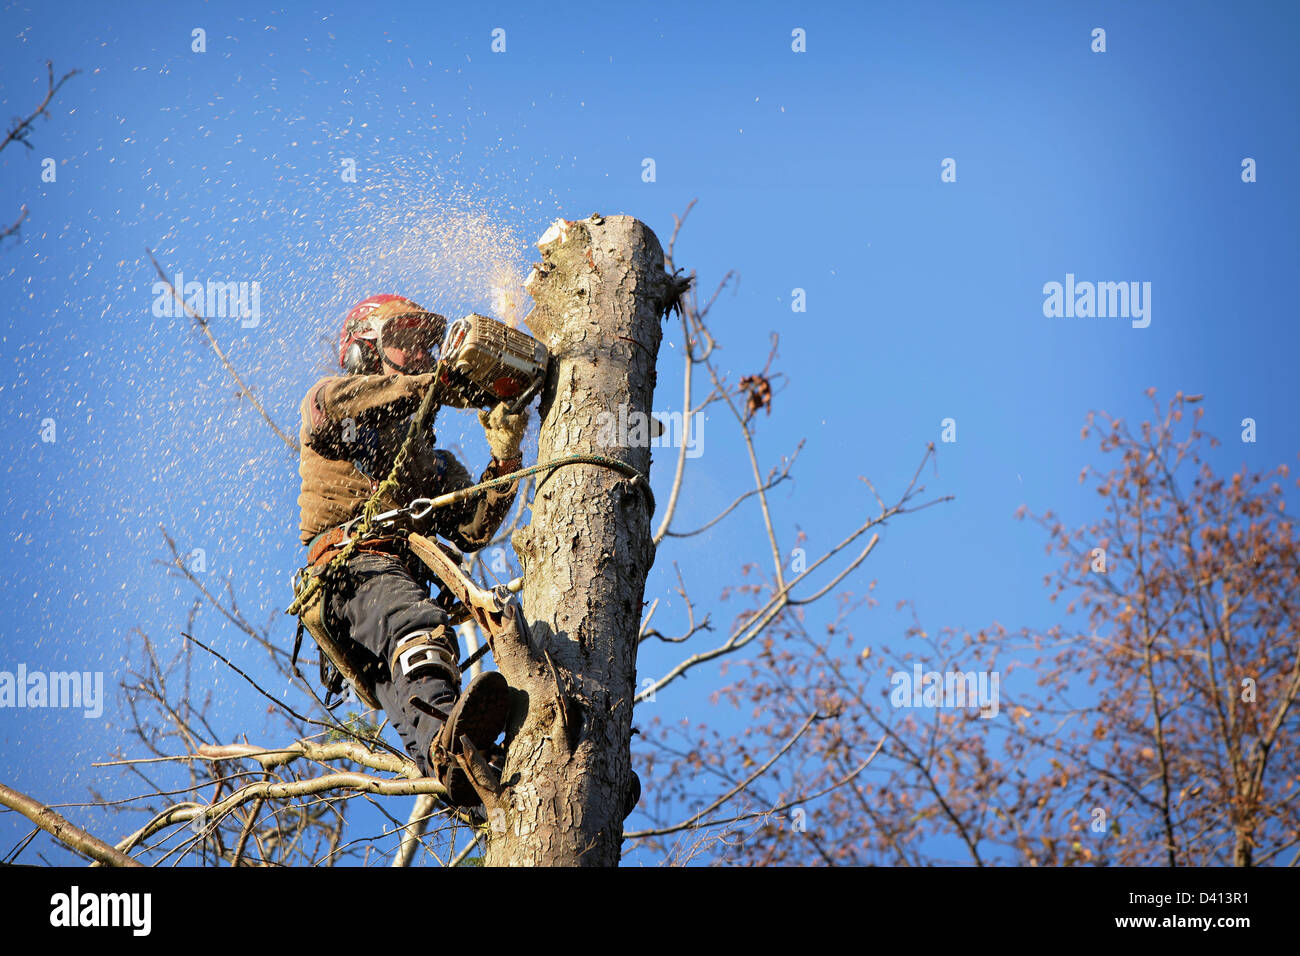 An arborist cutting a tree with a chainsaw Stock Photo